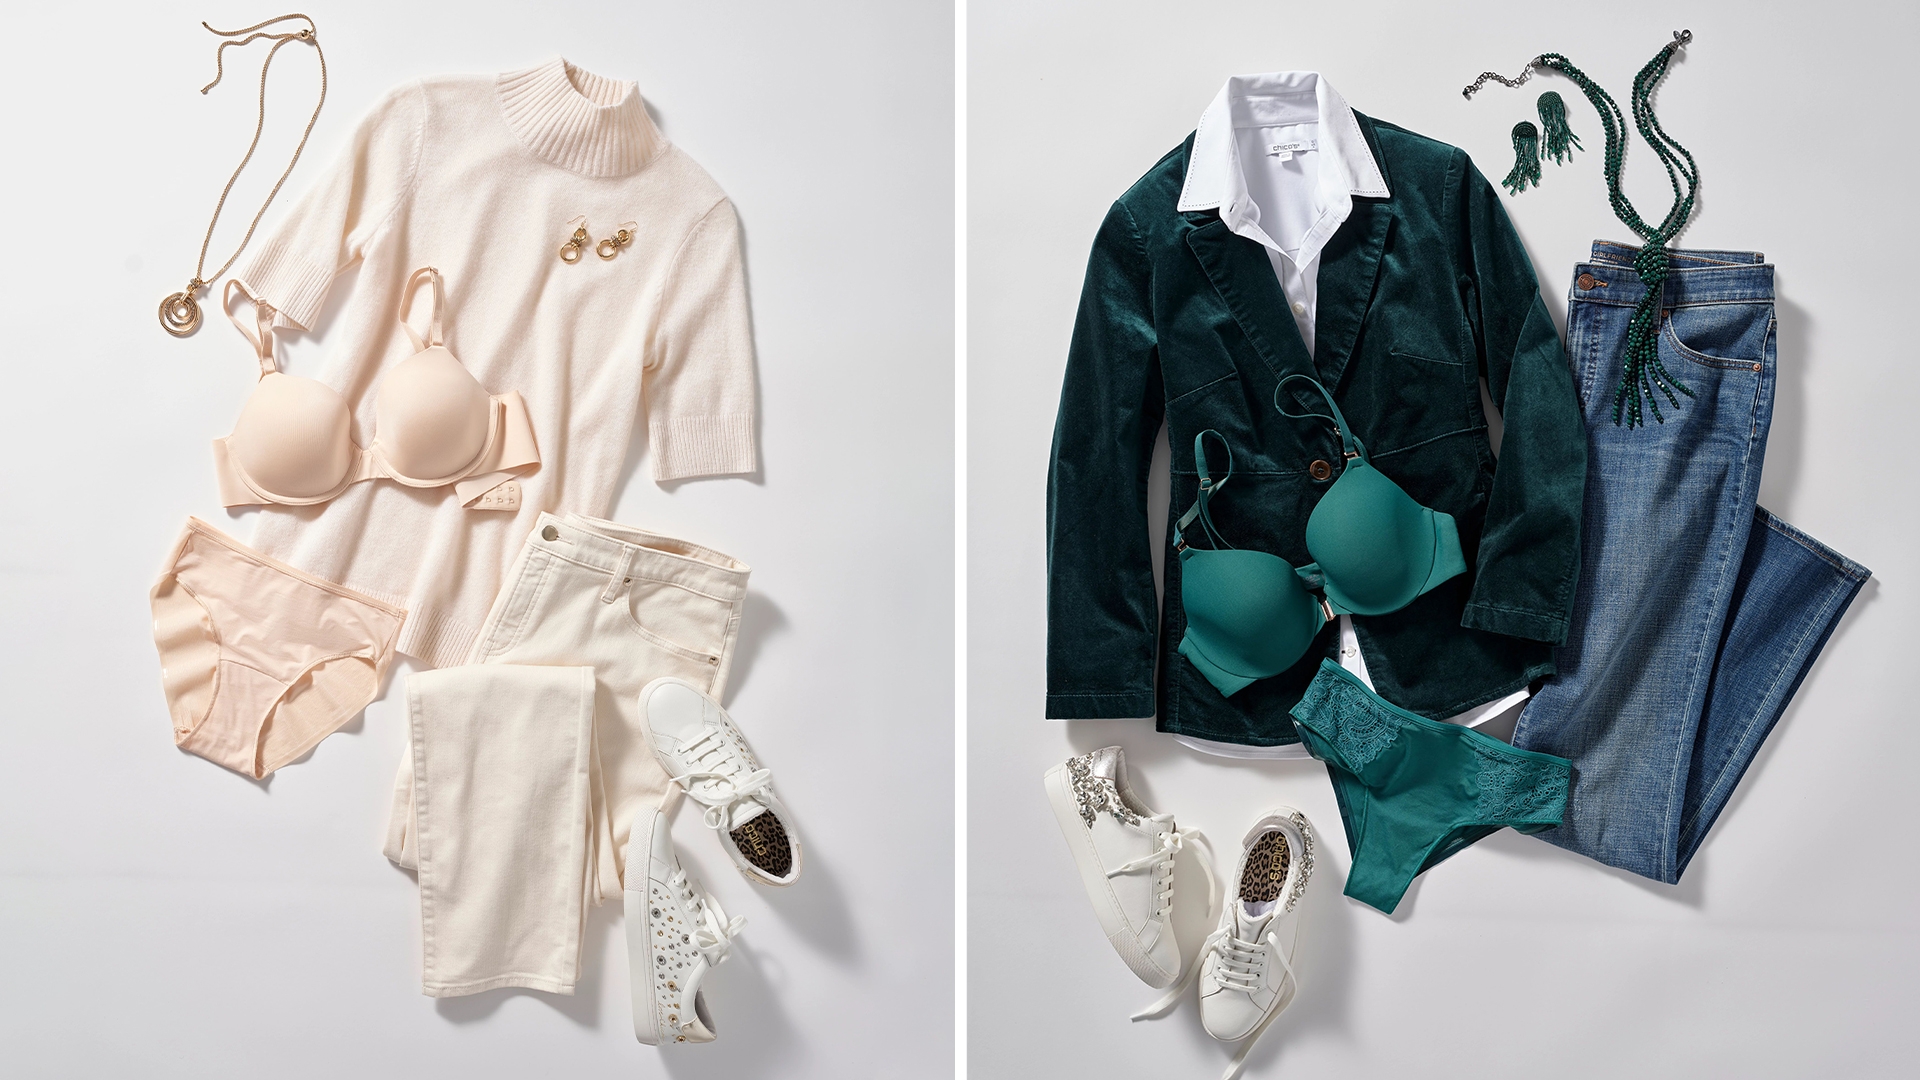 Laydown of nude and green bra and panties, off-white and blue jeans, off-white sweater and white blouse, green blazer, white sneakers, and gold and green jewelry. 